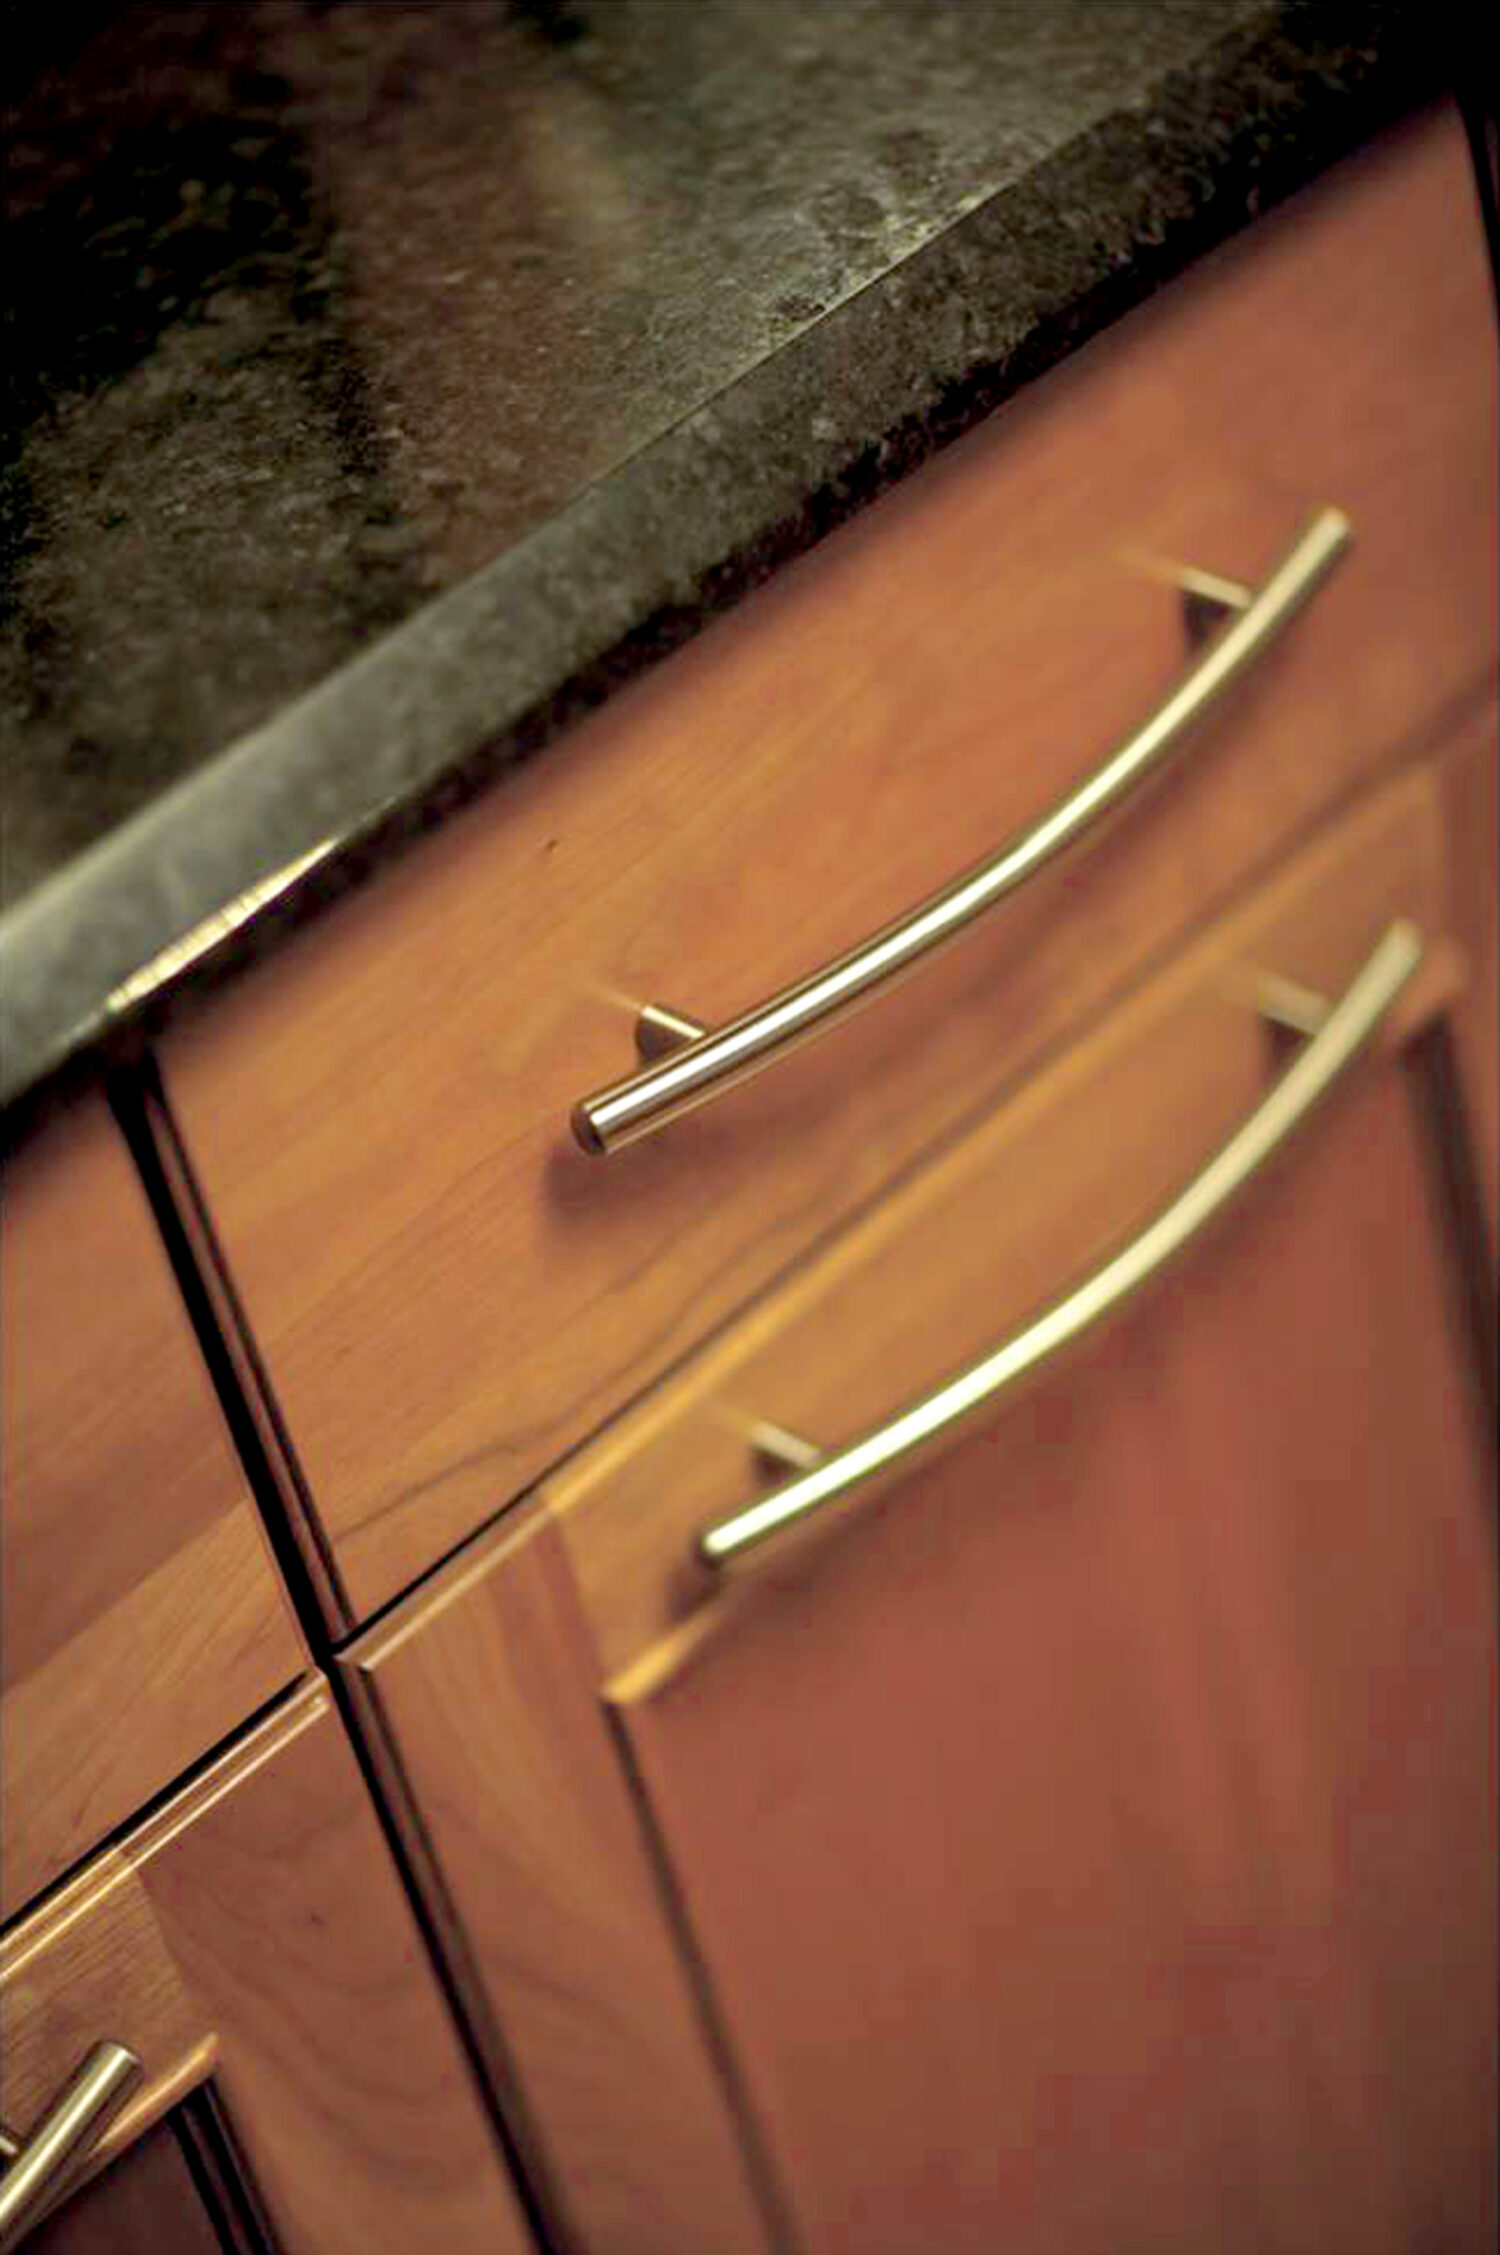 A close up to casual style cabinets with a warm stain on cherry wood with a black countertop.